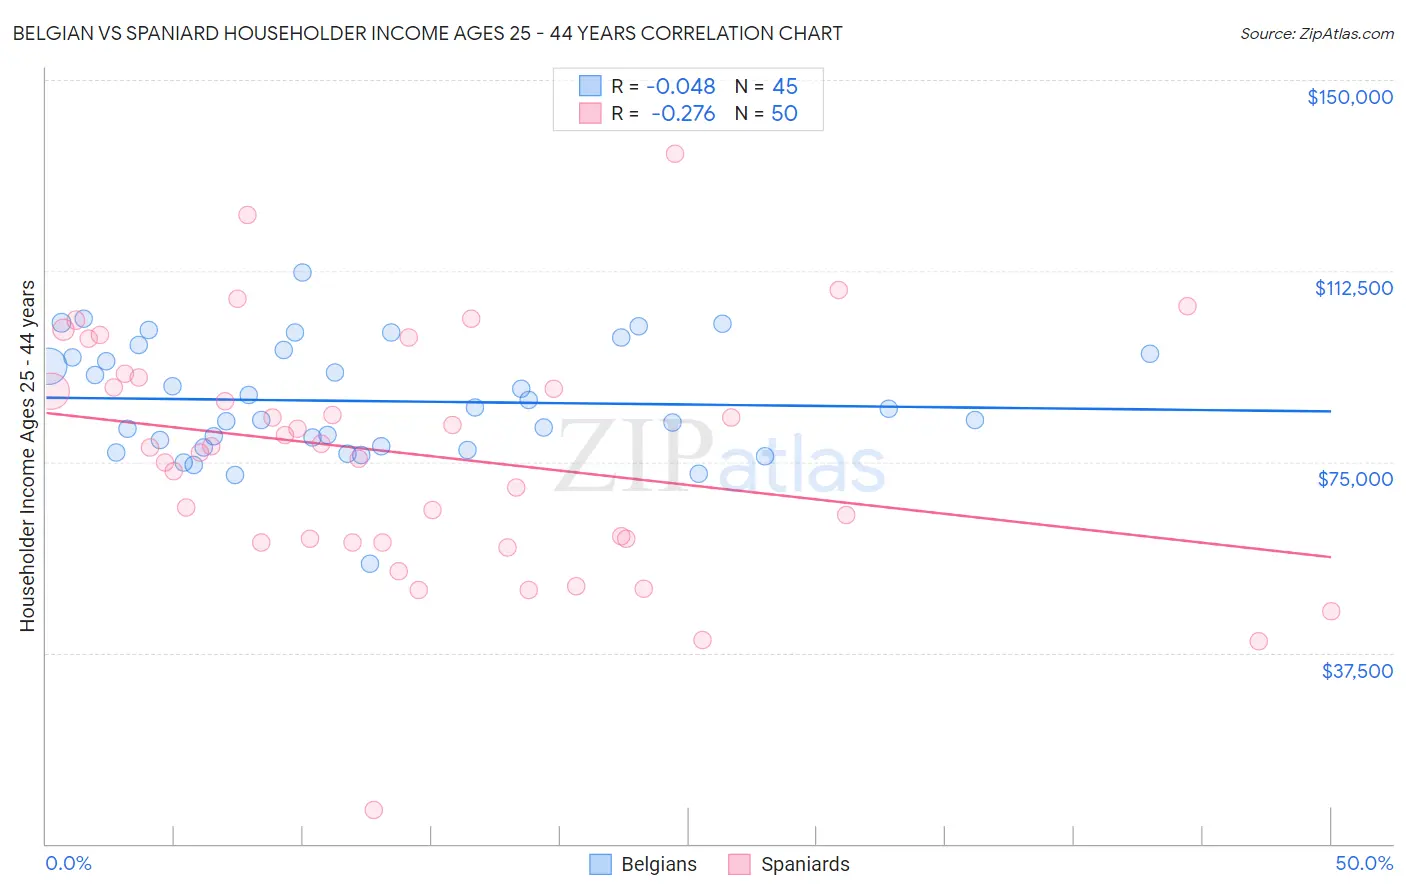 Belgian vs Spaniard Householder Income Ages 25 - 44 years